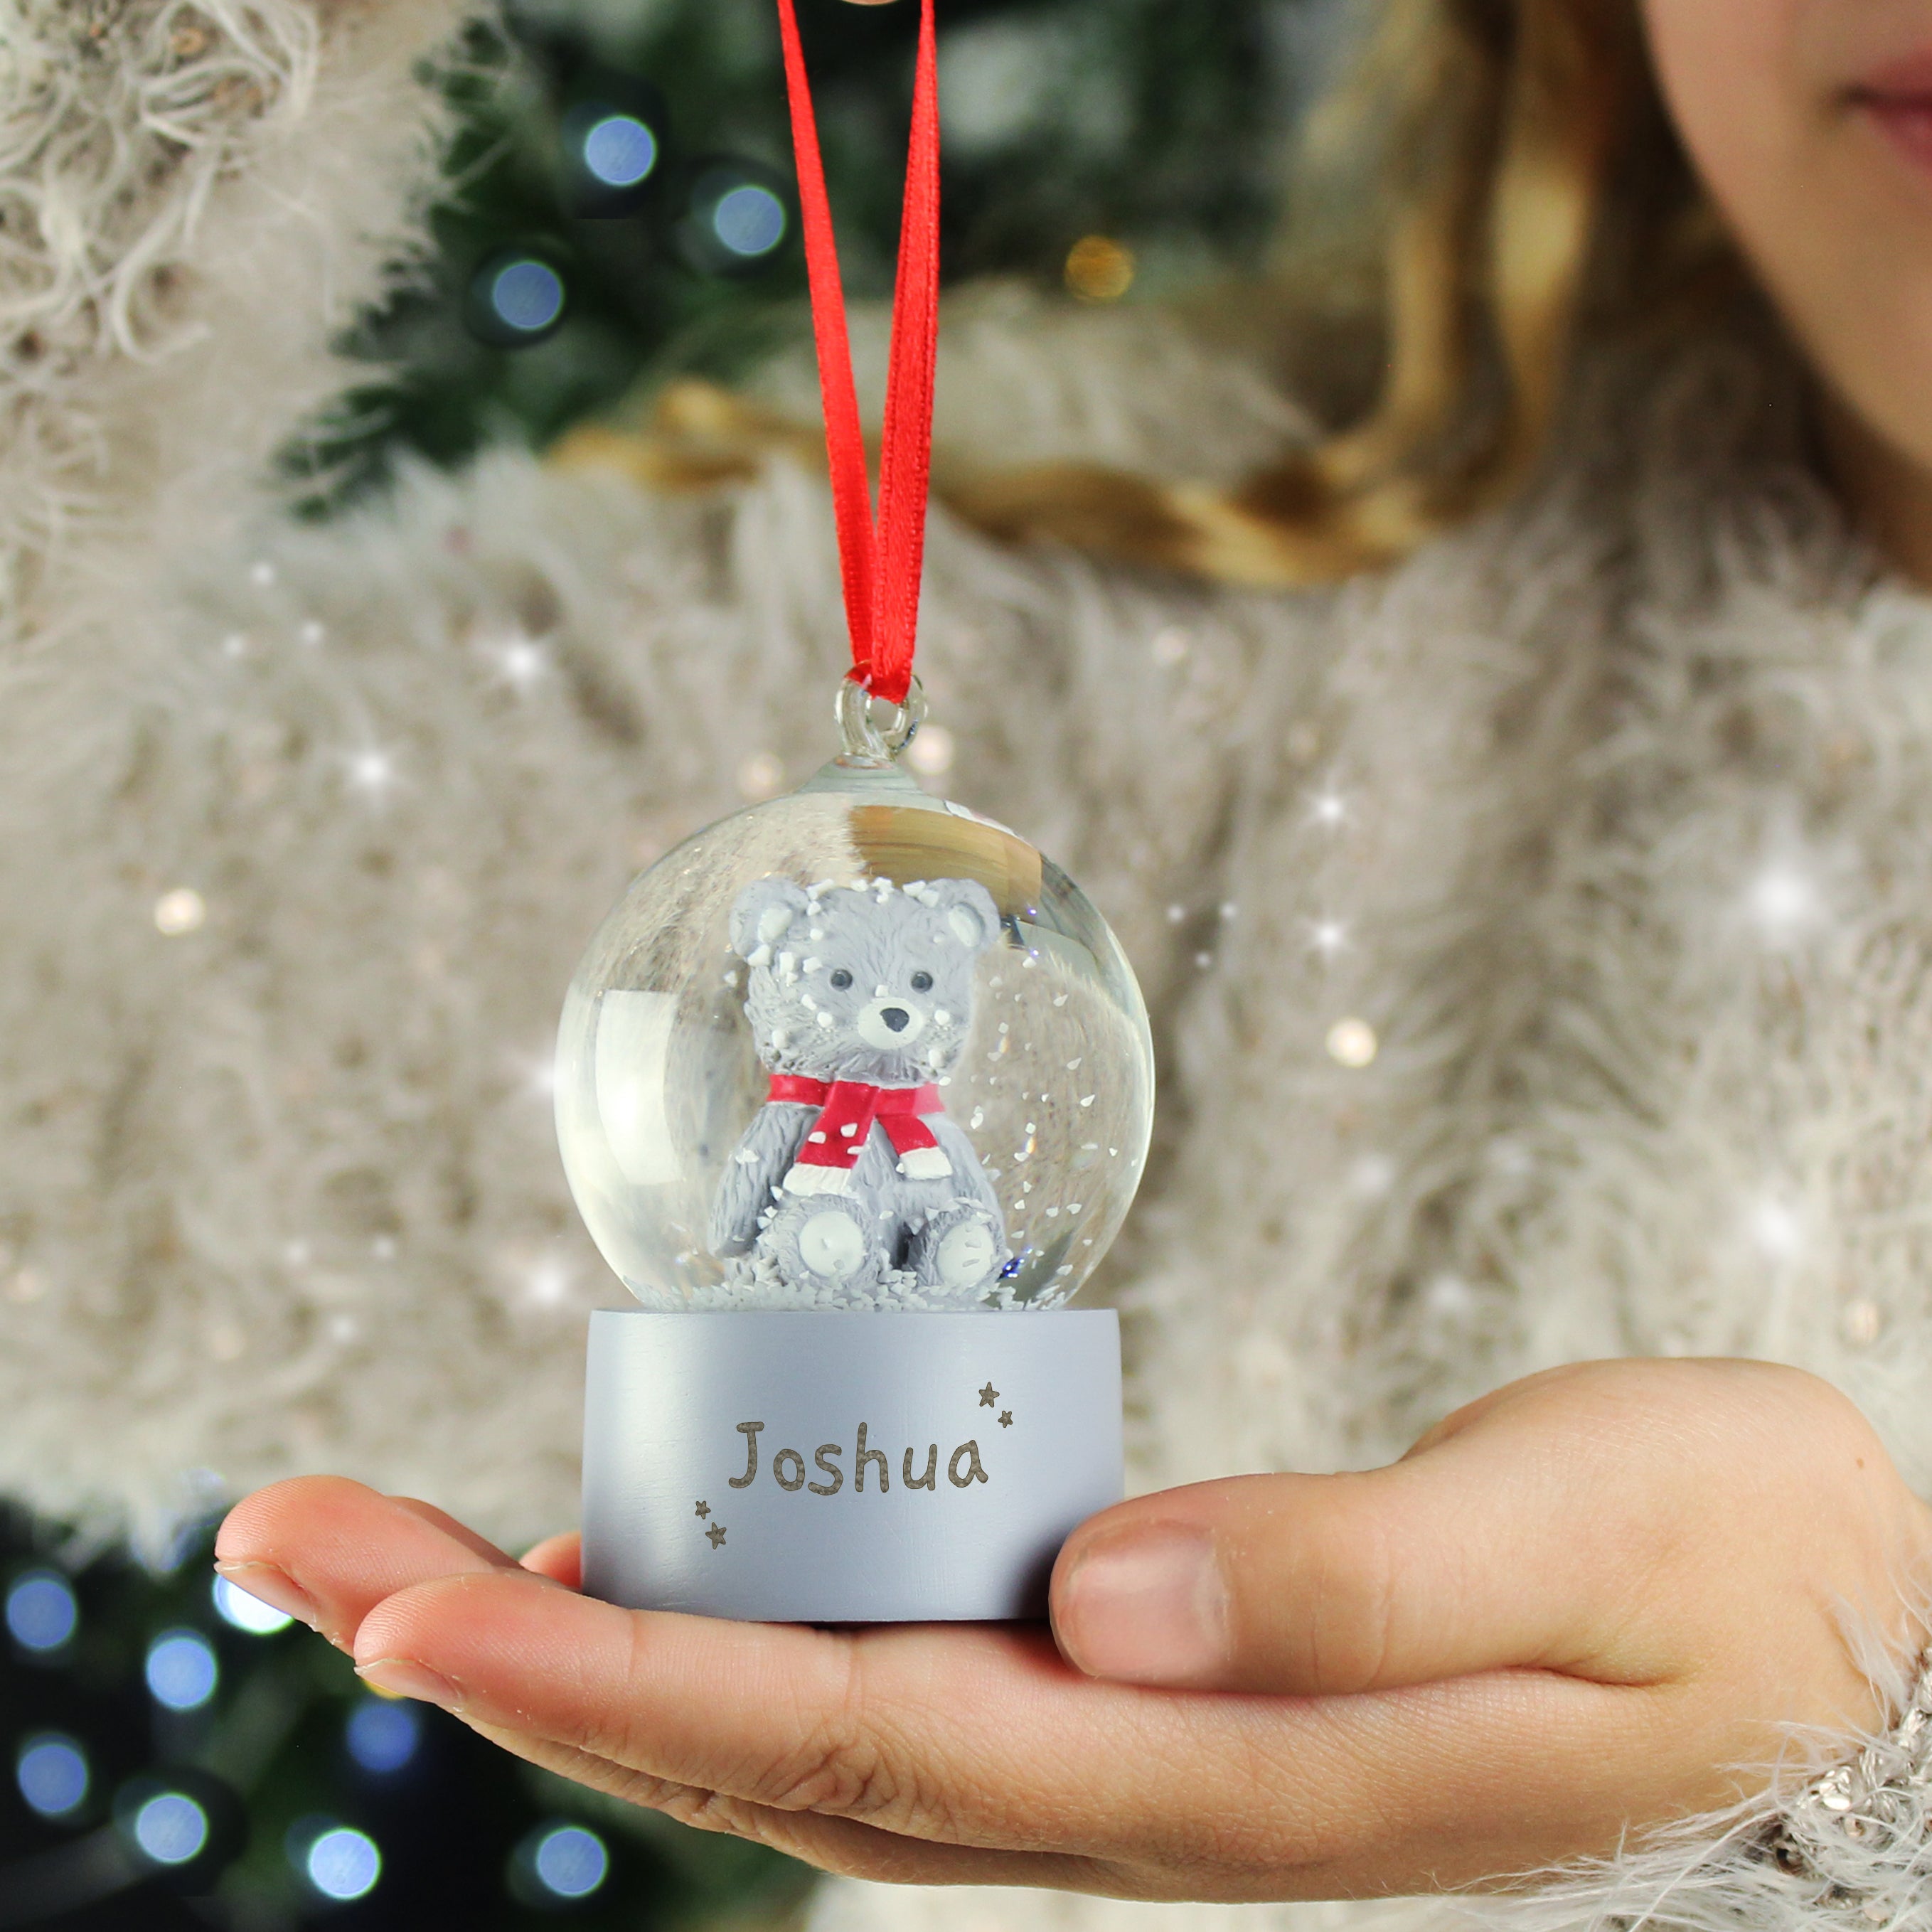 Personalised Name Only Teddy Bear Glitter Snow Globe Tree Decoration